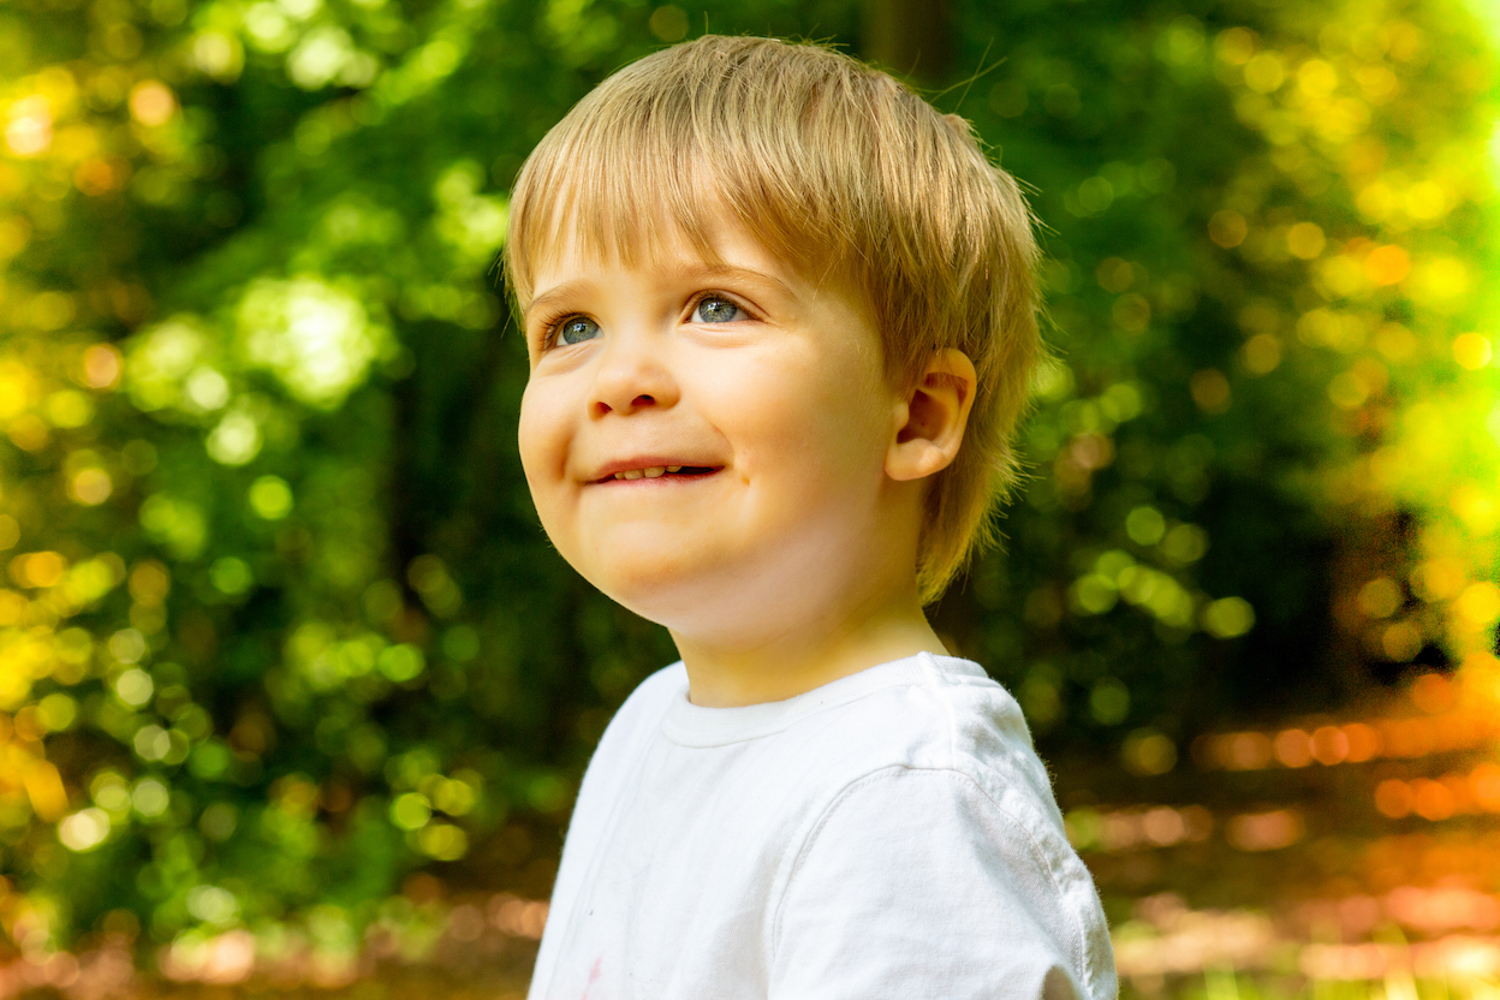 Young boy with blond hair and blue eyes smiling in the garden